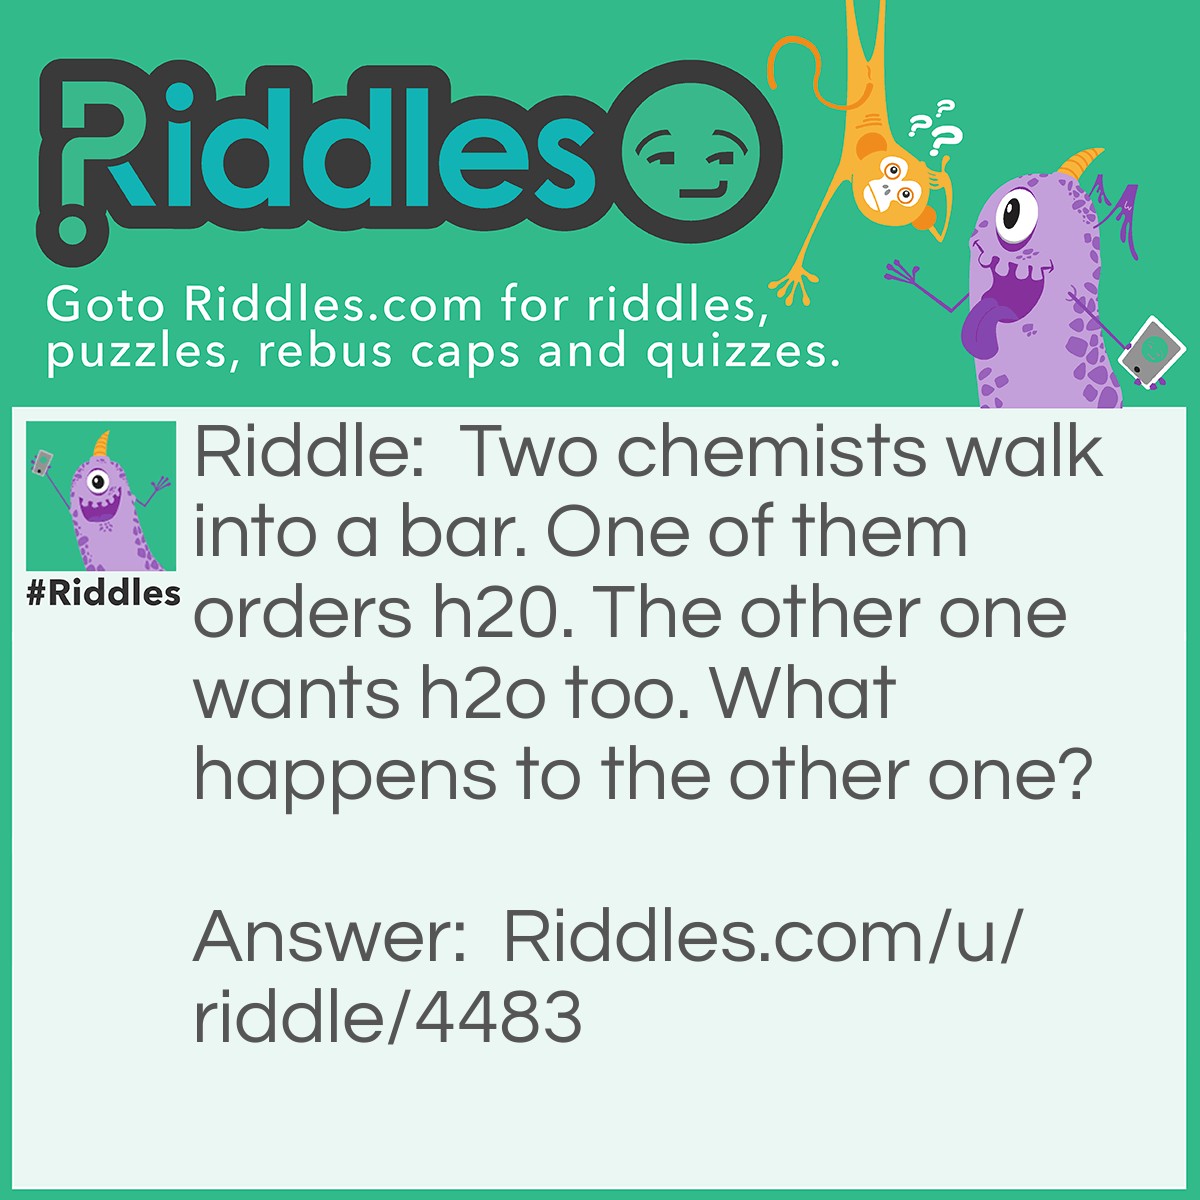 Riddle: Two chemists walk into a bar. One of them orders h20. The other one wants h2o too. What happens to the other one? Answer: He dies because he drank hydrogen peroxide.